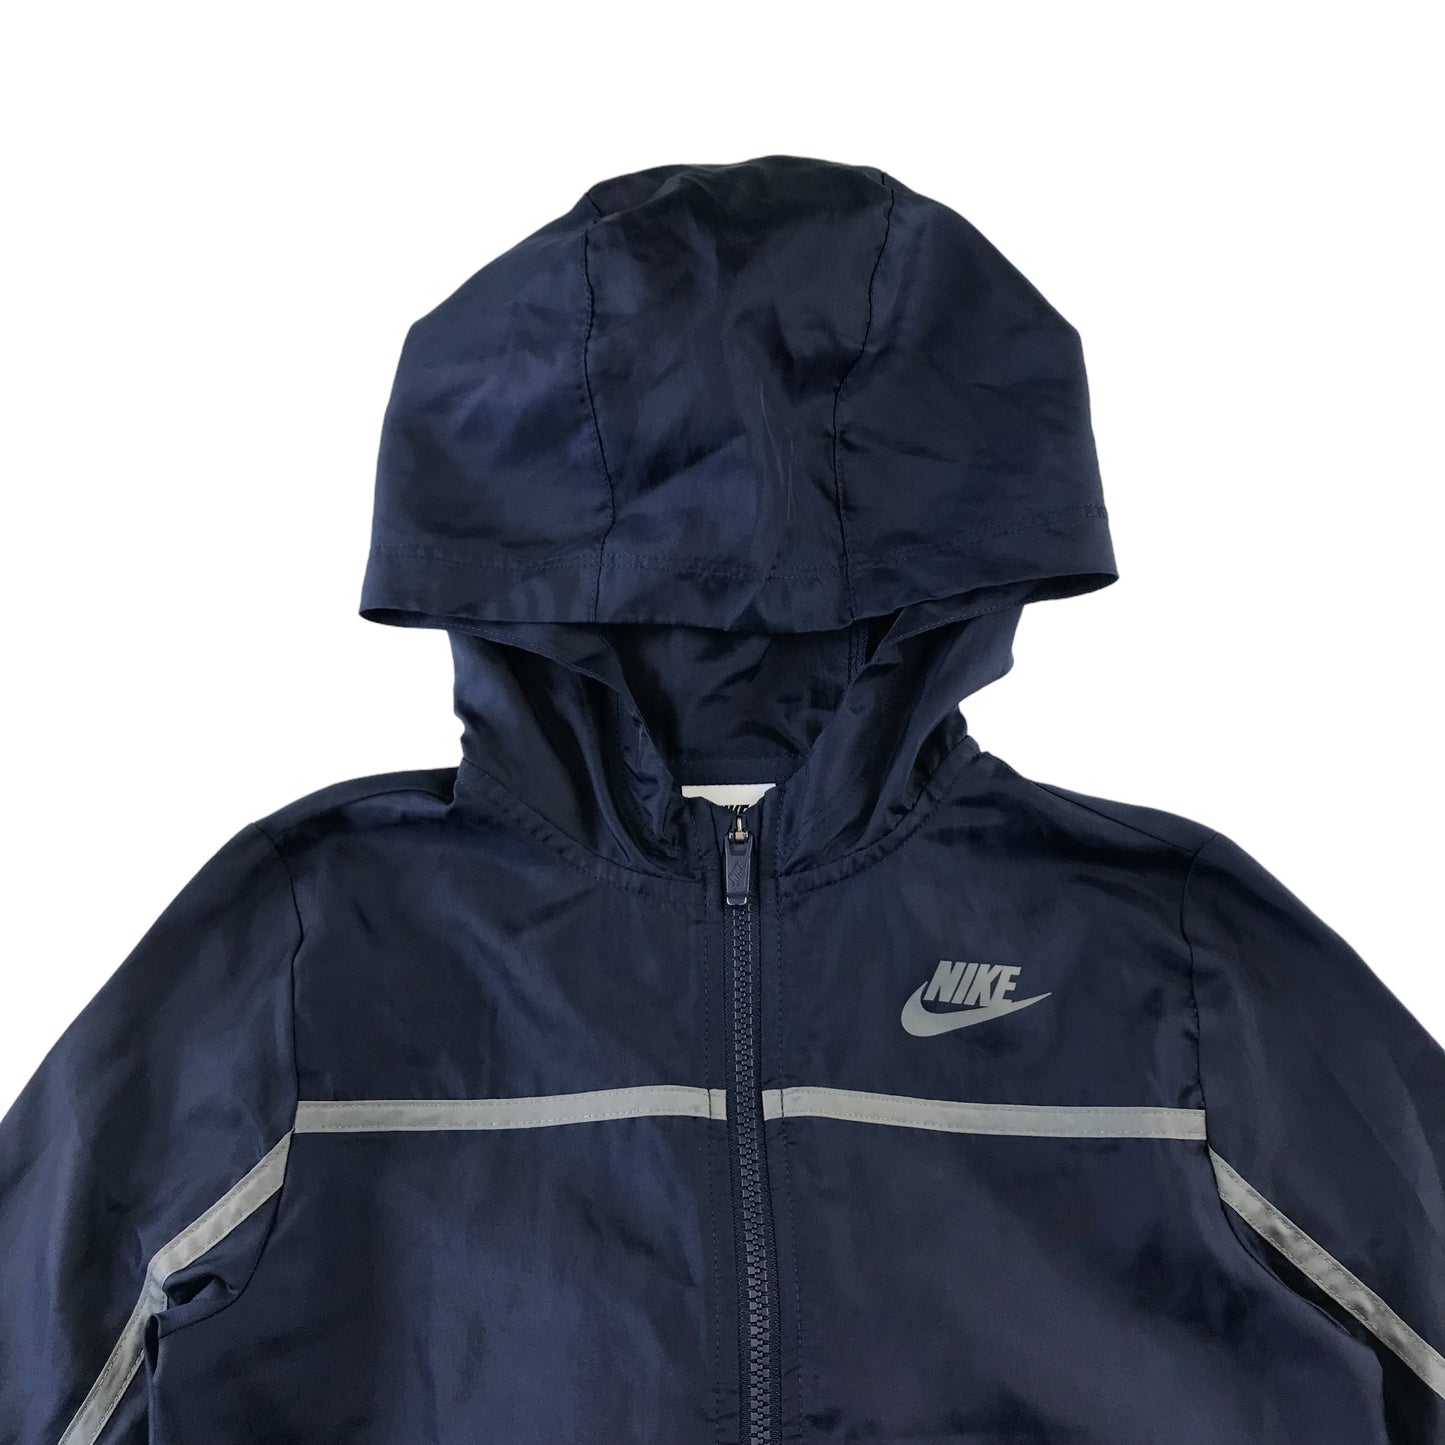 Nike light jacket 7 years navy with grey logo and line detail